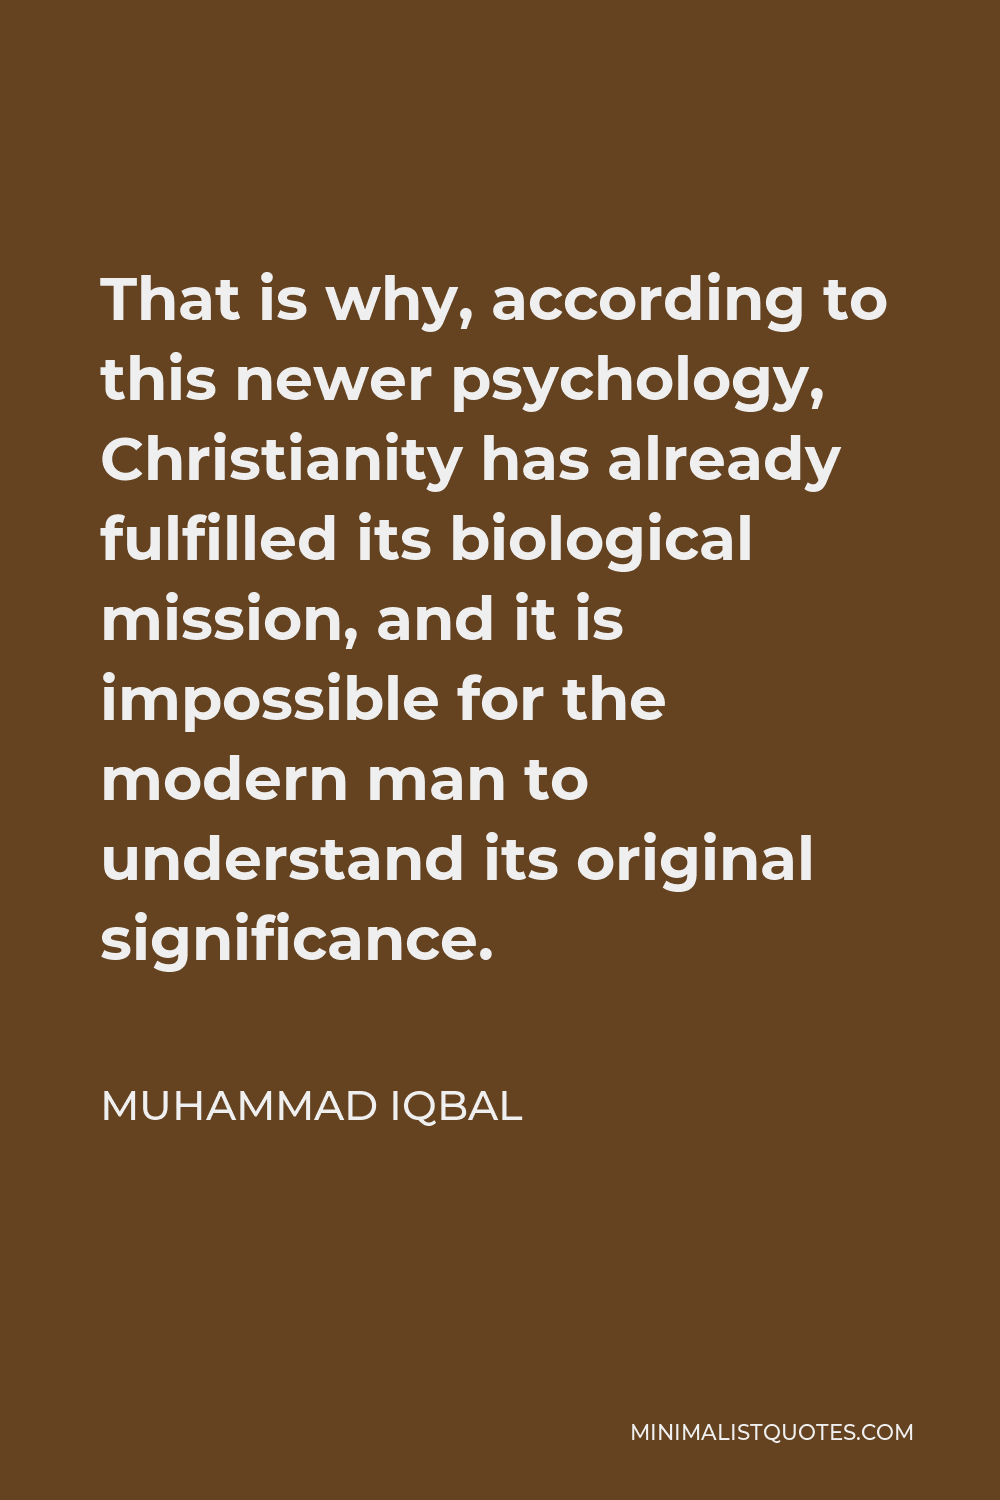 Muhammad Iqbal Quote - That is why, according to this newer psychology, Christianity has already fulfilled its biological mission, and it is impossible for the modern man to understand its original significance.